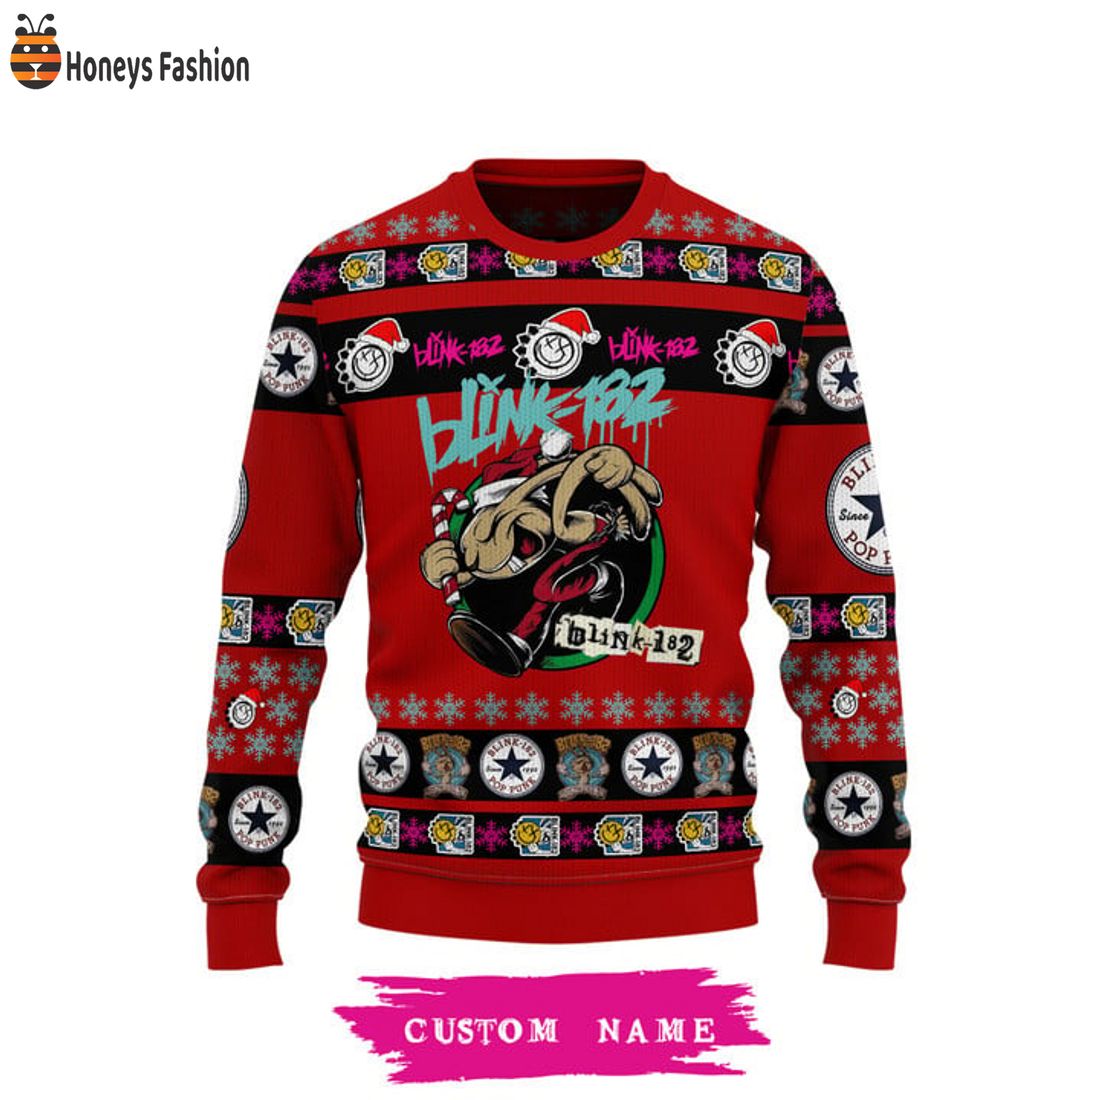 BEST Blink 182 Bunny Custome Personalized Ugly Christmas Sweater